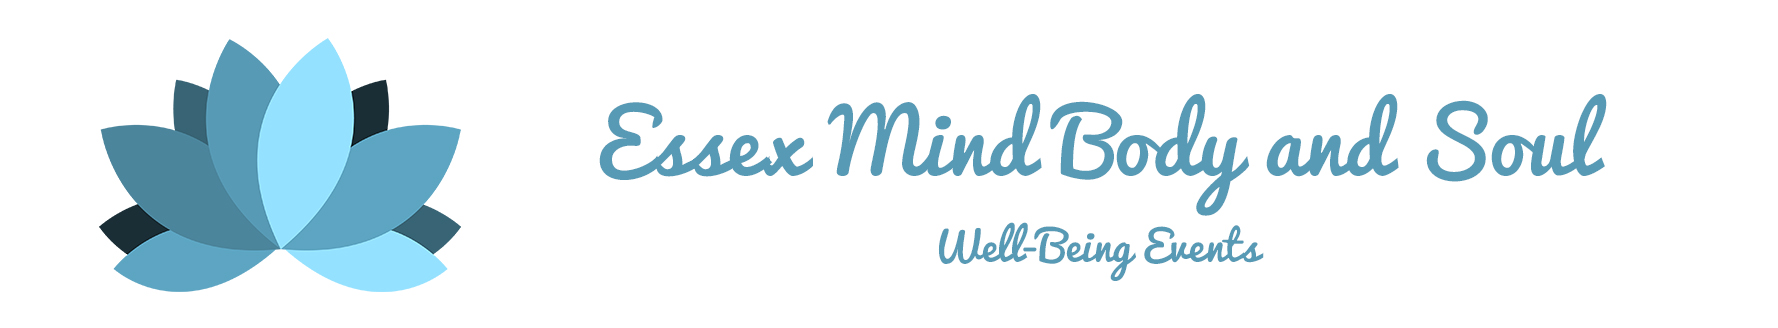 Essex Mind Body and Soul Wellbeing Events